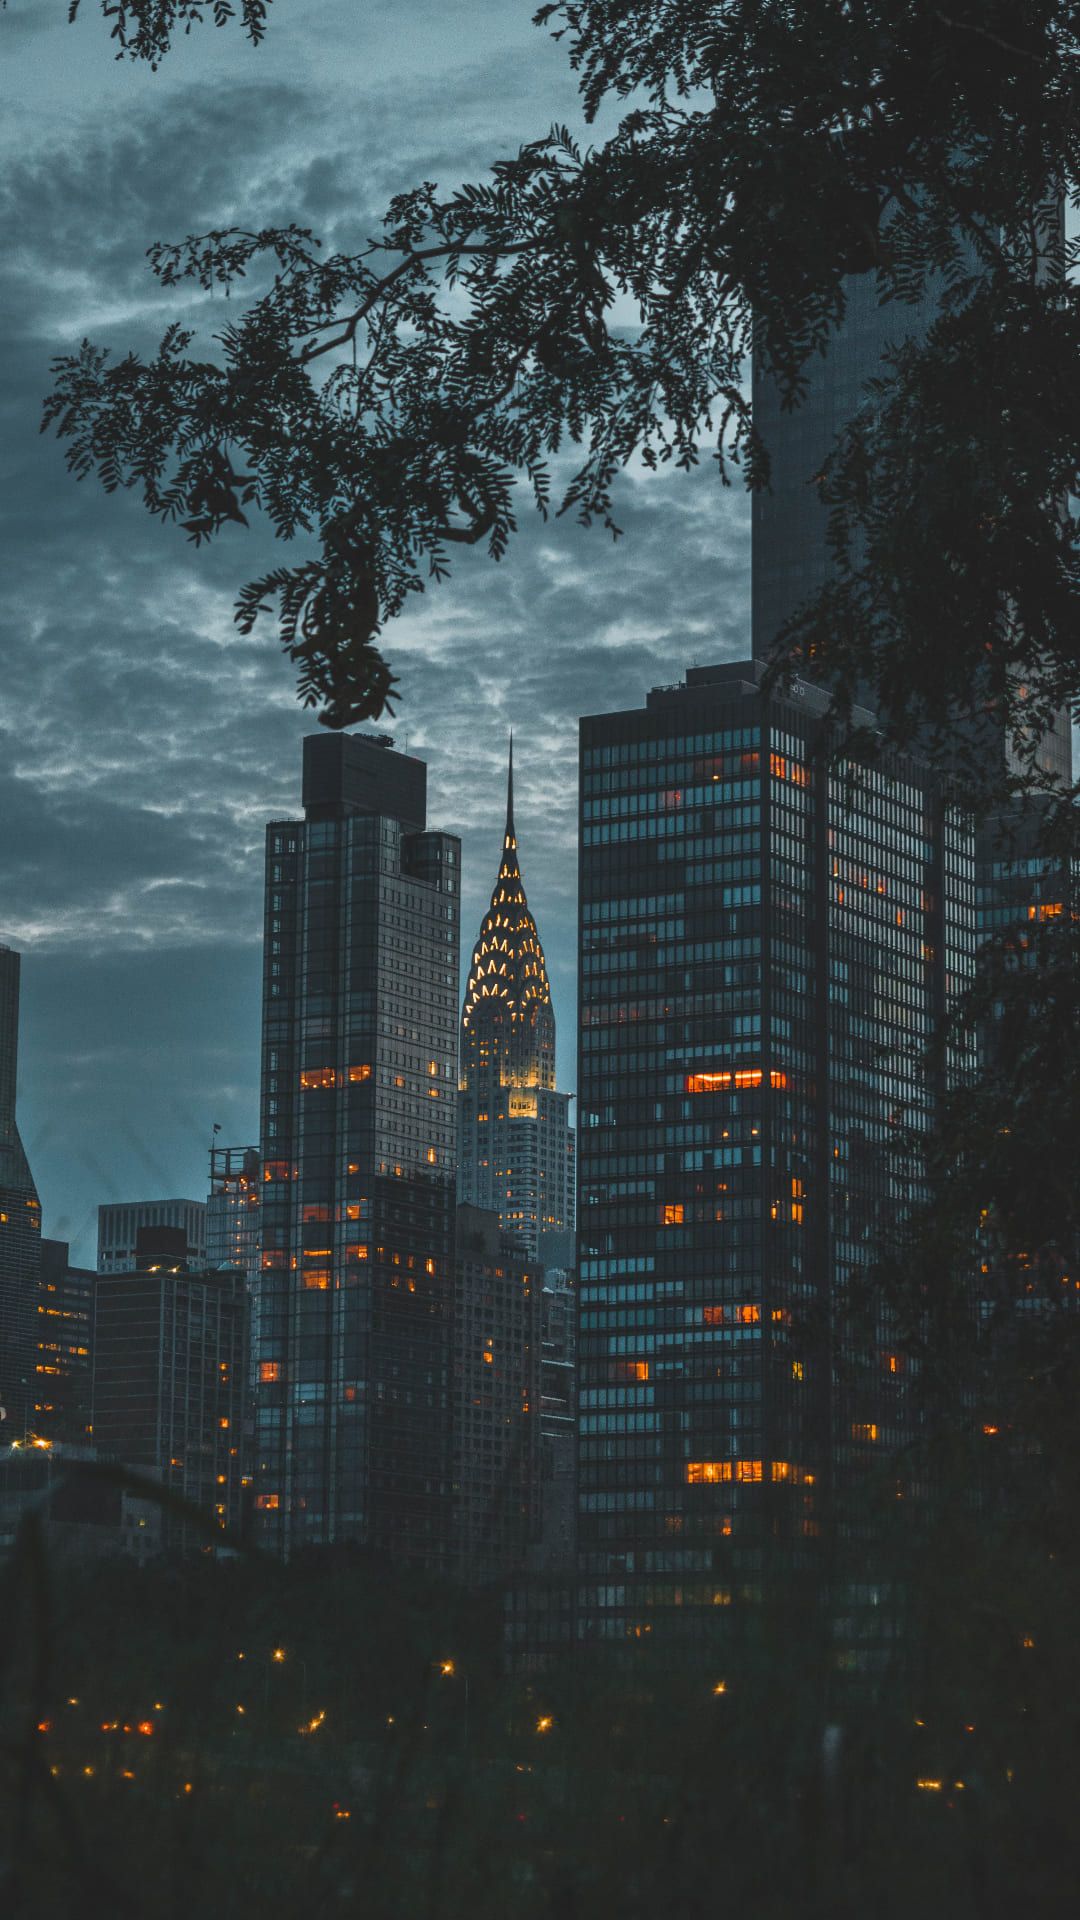 A city skyline at dusk with trees in the foreground - New York